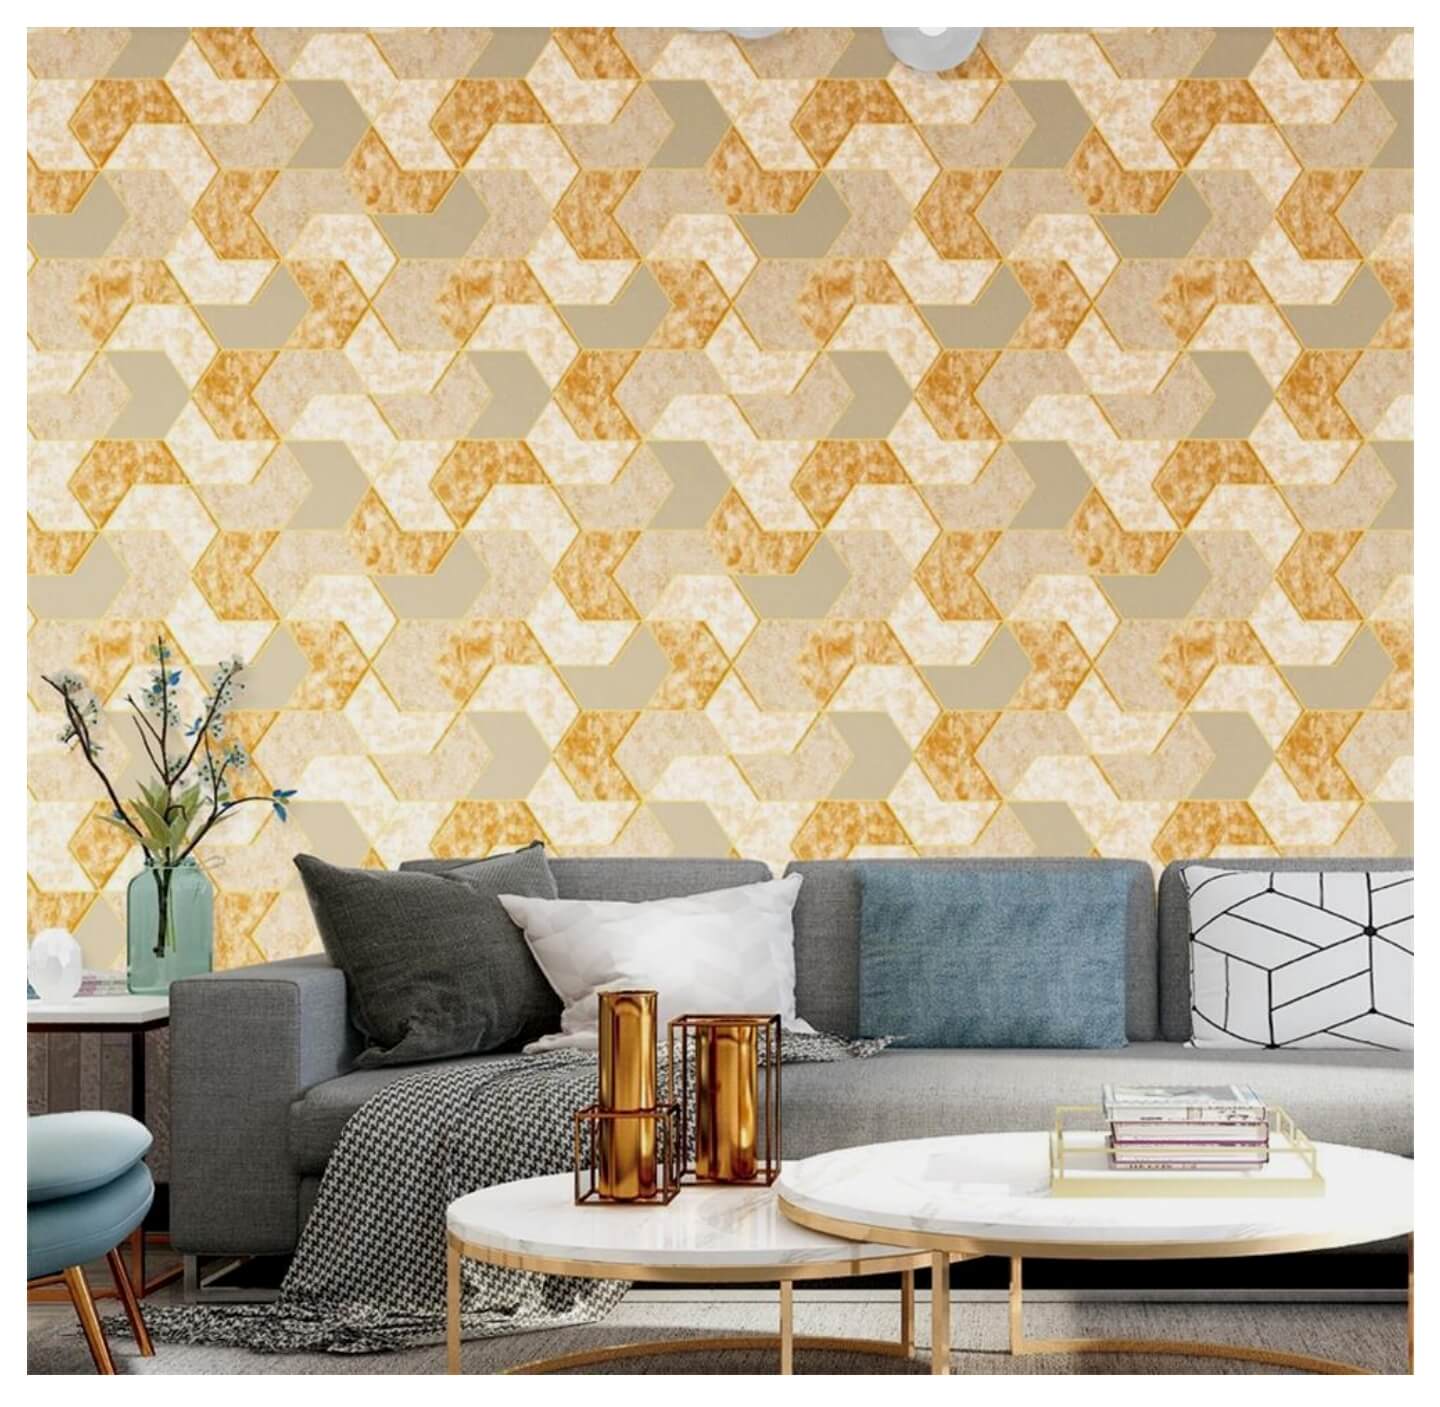 Beautiful Color 3D Design Wallpaper Better choice For Living Area, Bedroom, kids room, Office Durable PVC Wallpapers (20)